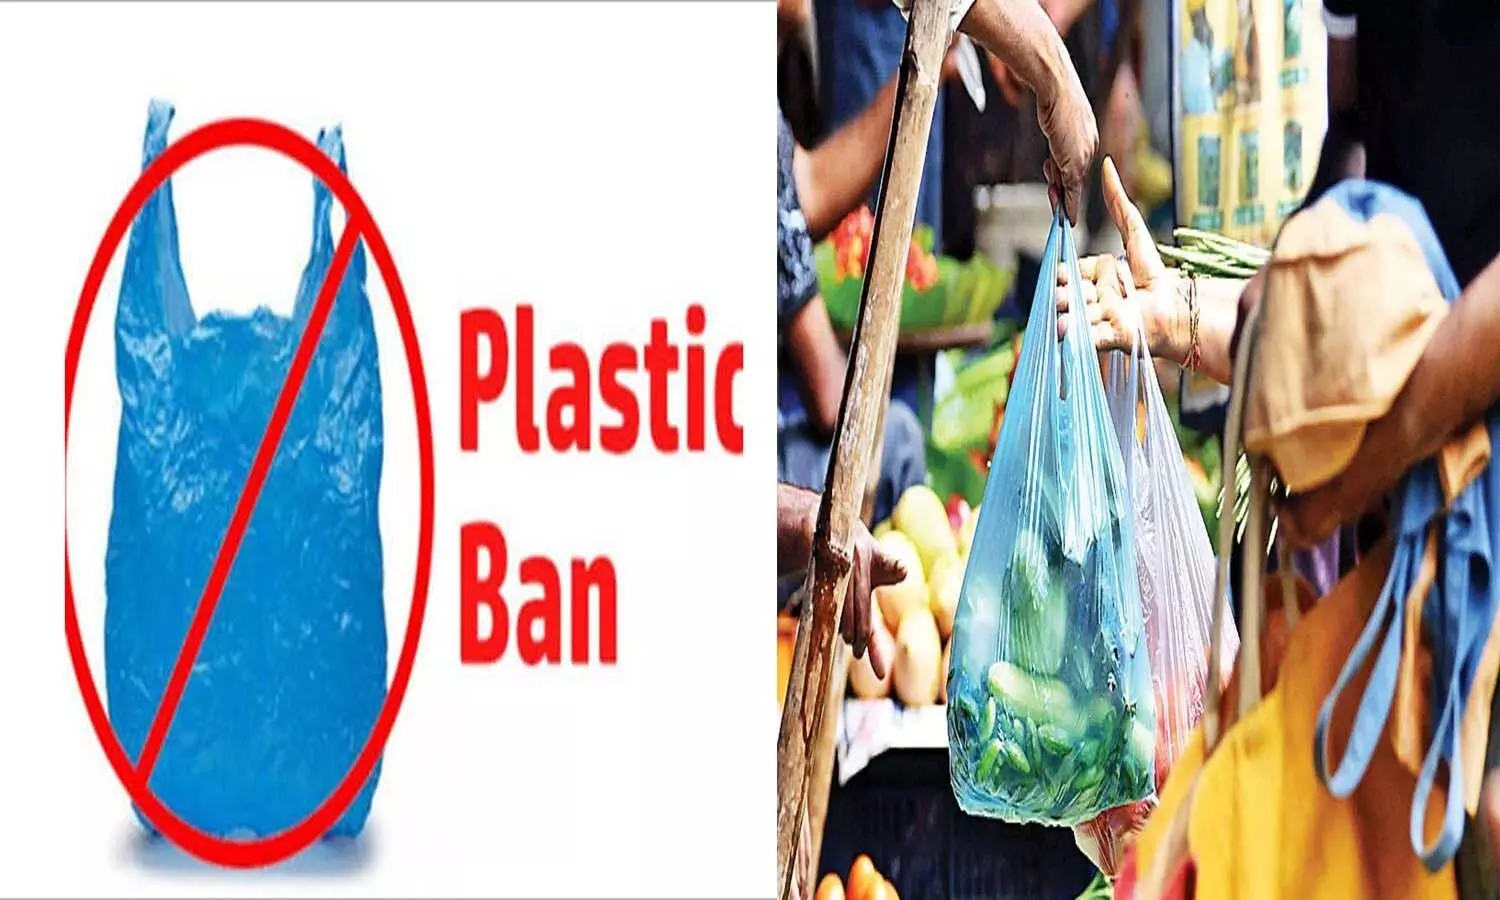 Race will start from 29th to avoid the use of plastic, power will be cut in illegal factories